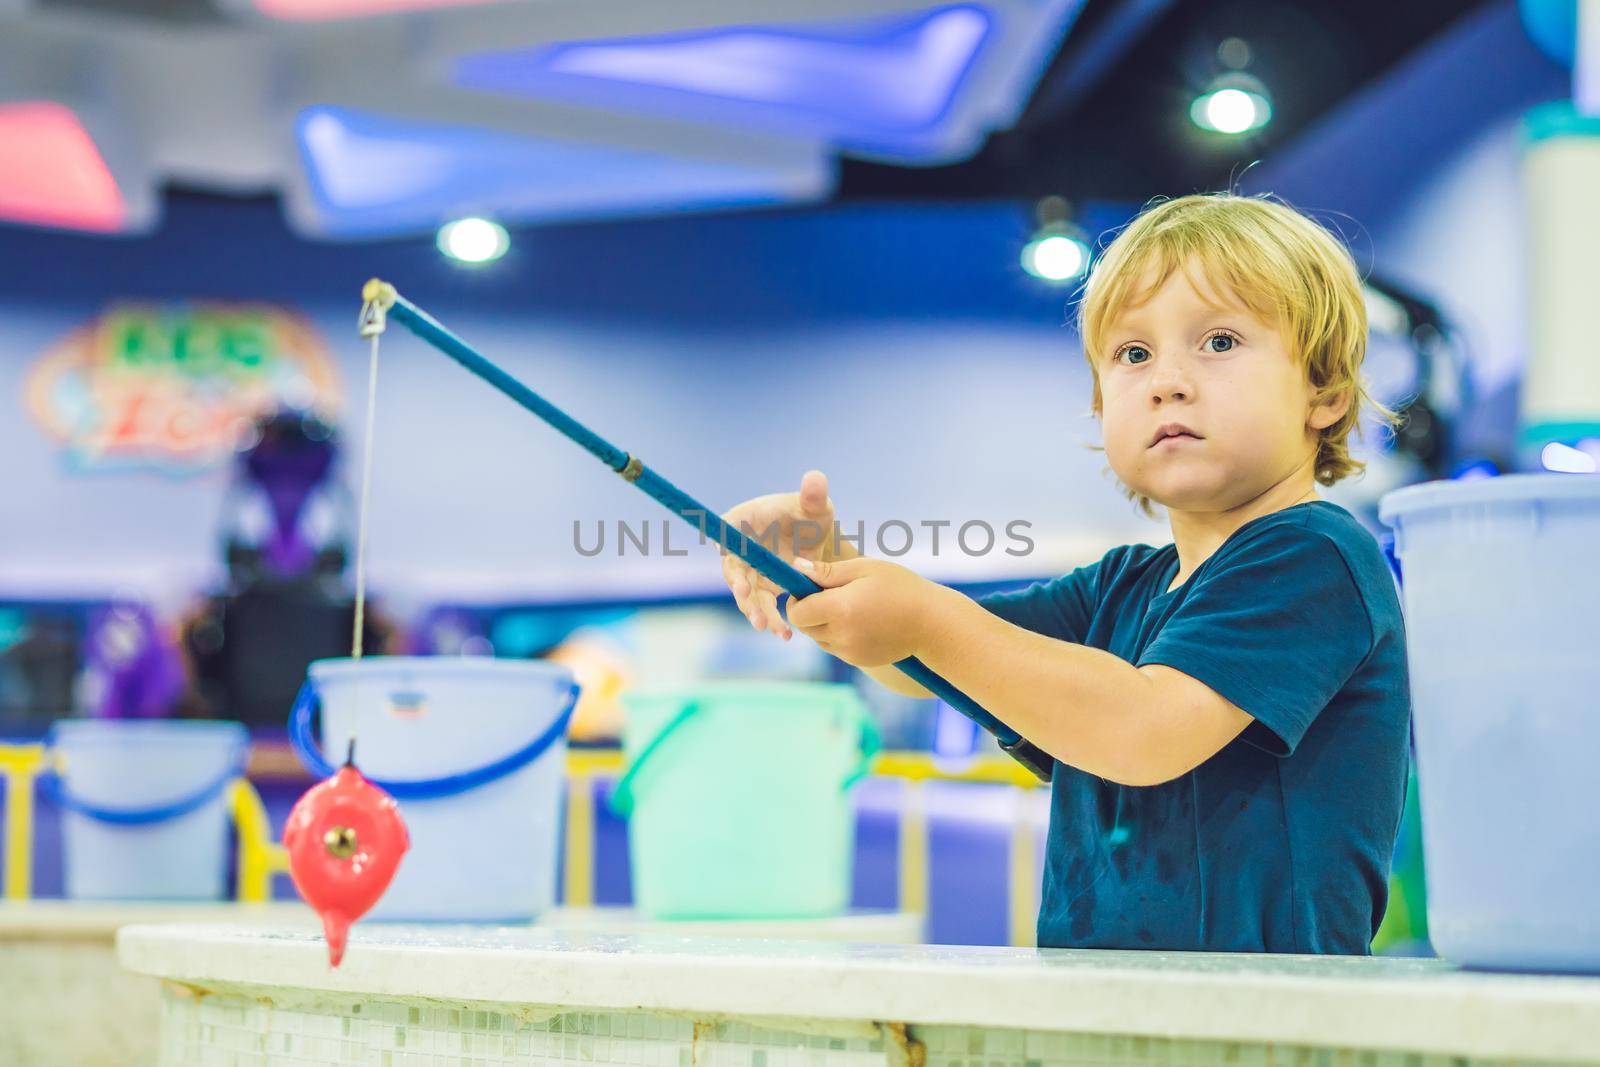 Cute boy in the playroom fishing. The development of fine motor concept. Creativity Game concept.